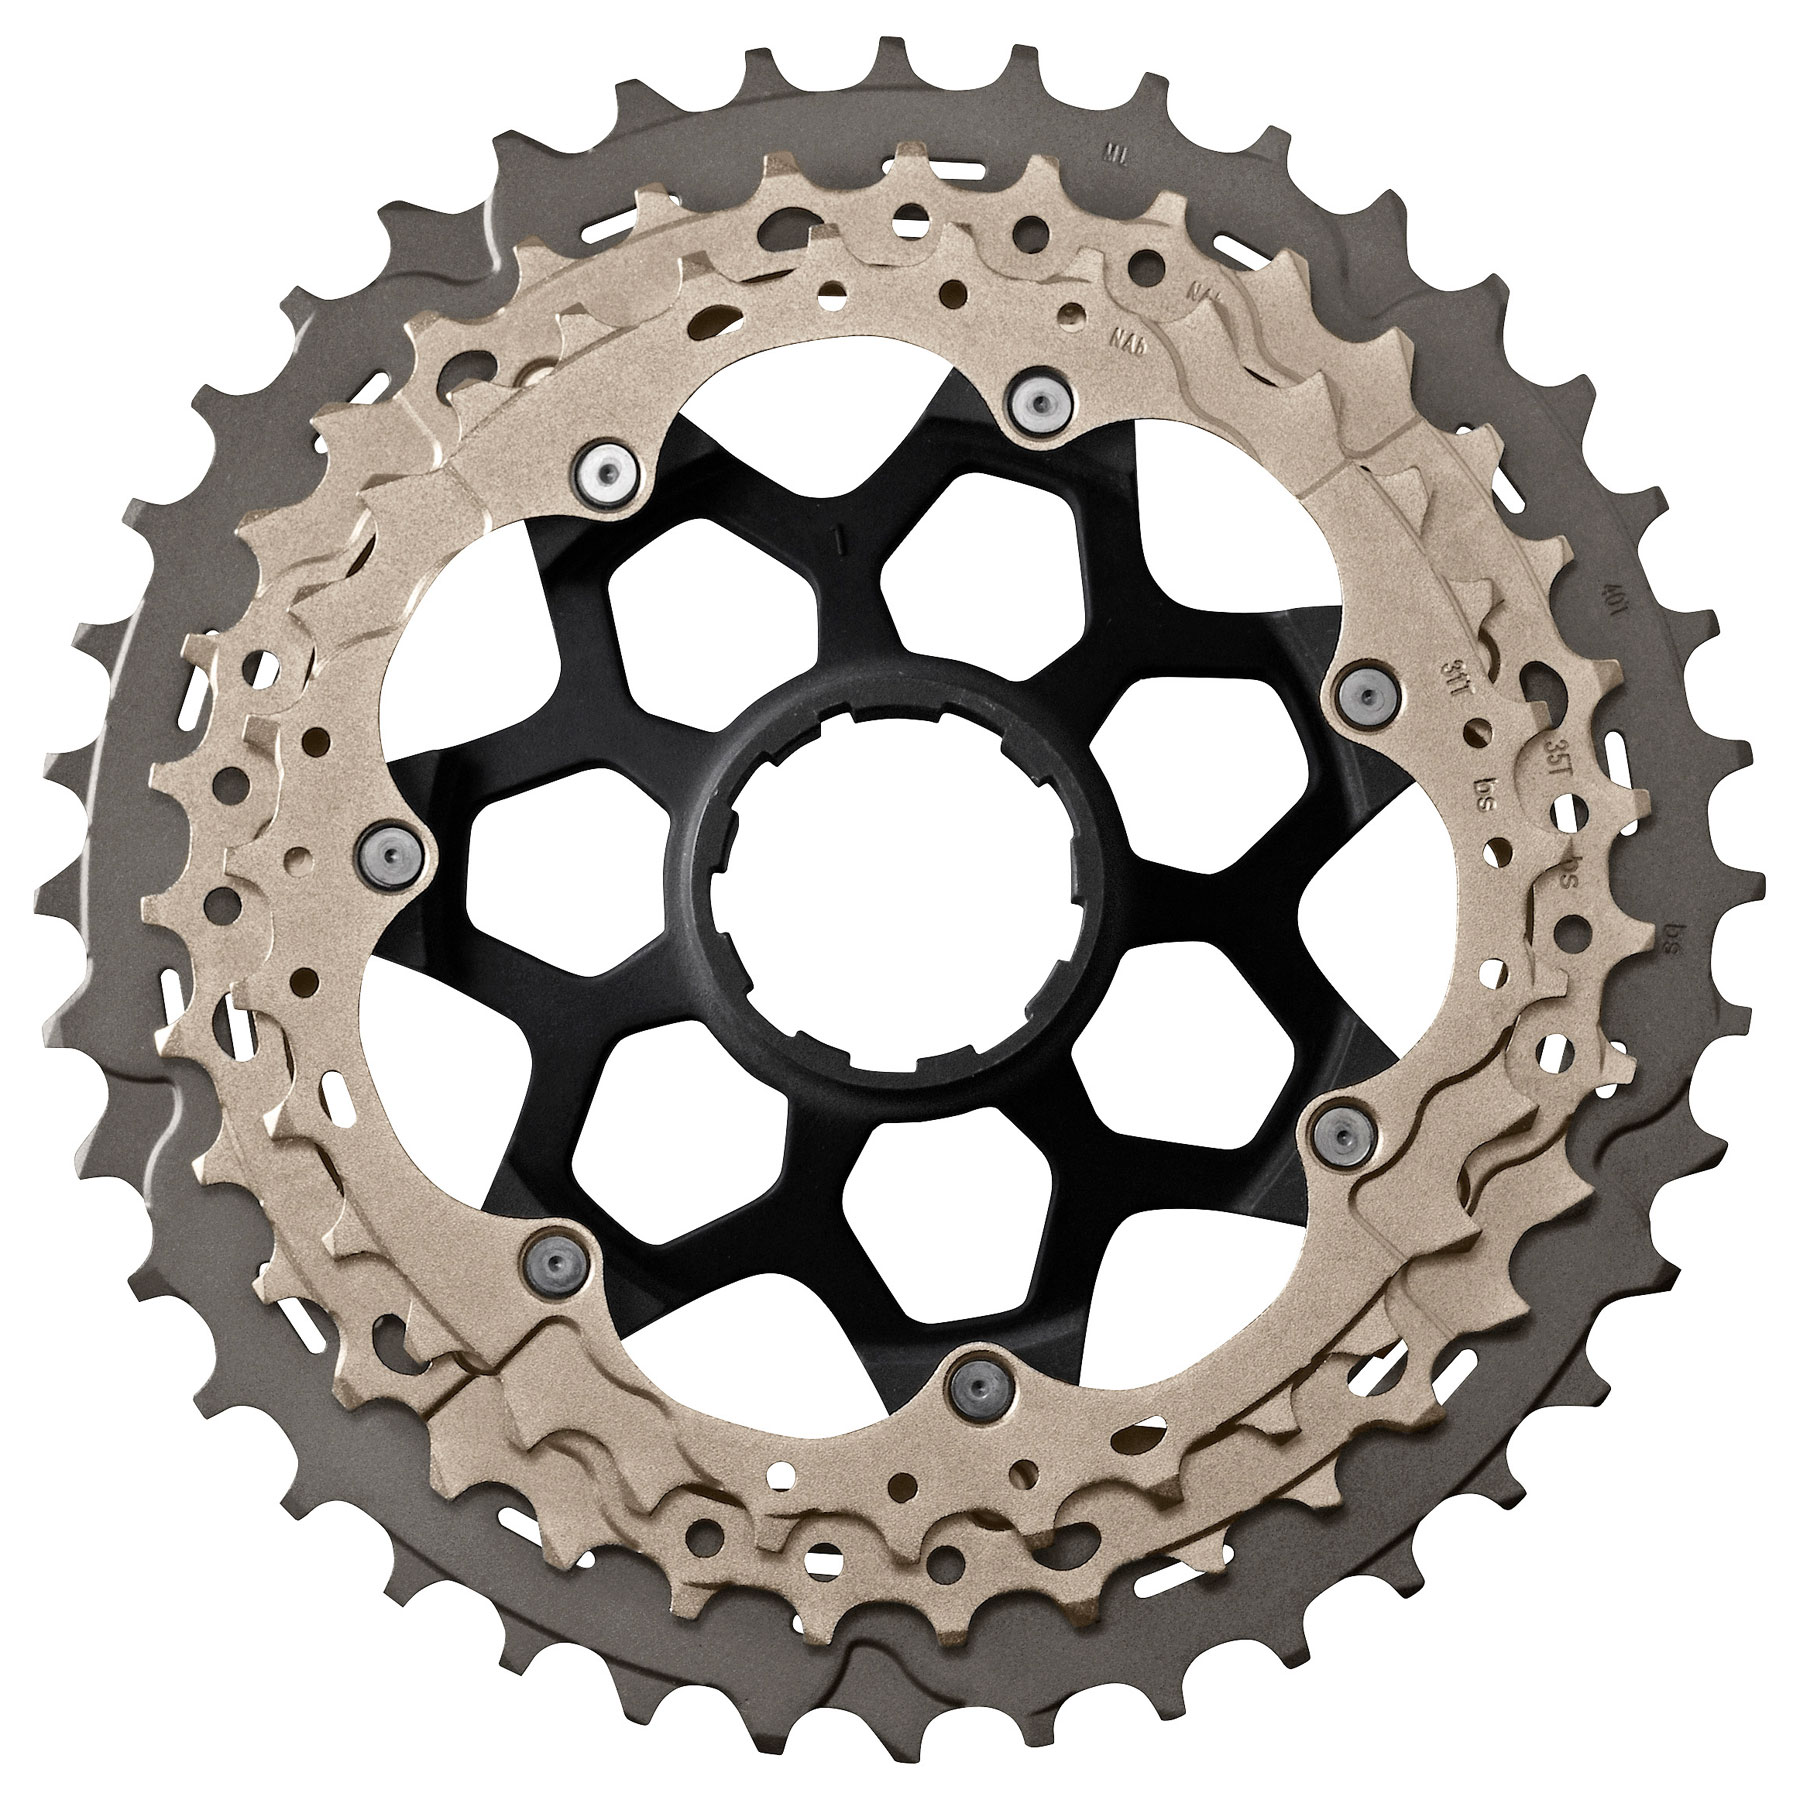 Picture of Shimano Sprocket for Deore XT / SLX 11-speed Cassette - 32/37/46 teeth for 11-46 (Y1RK98070) - CS-M8000